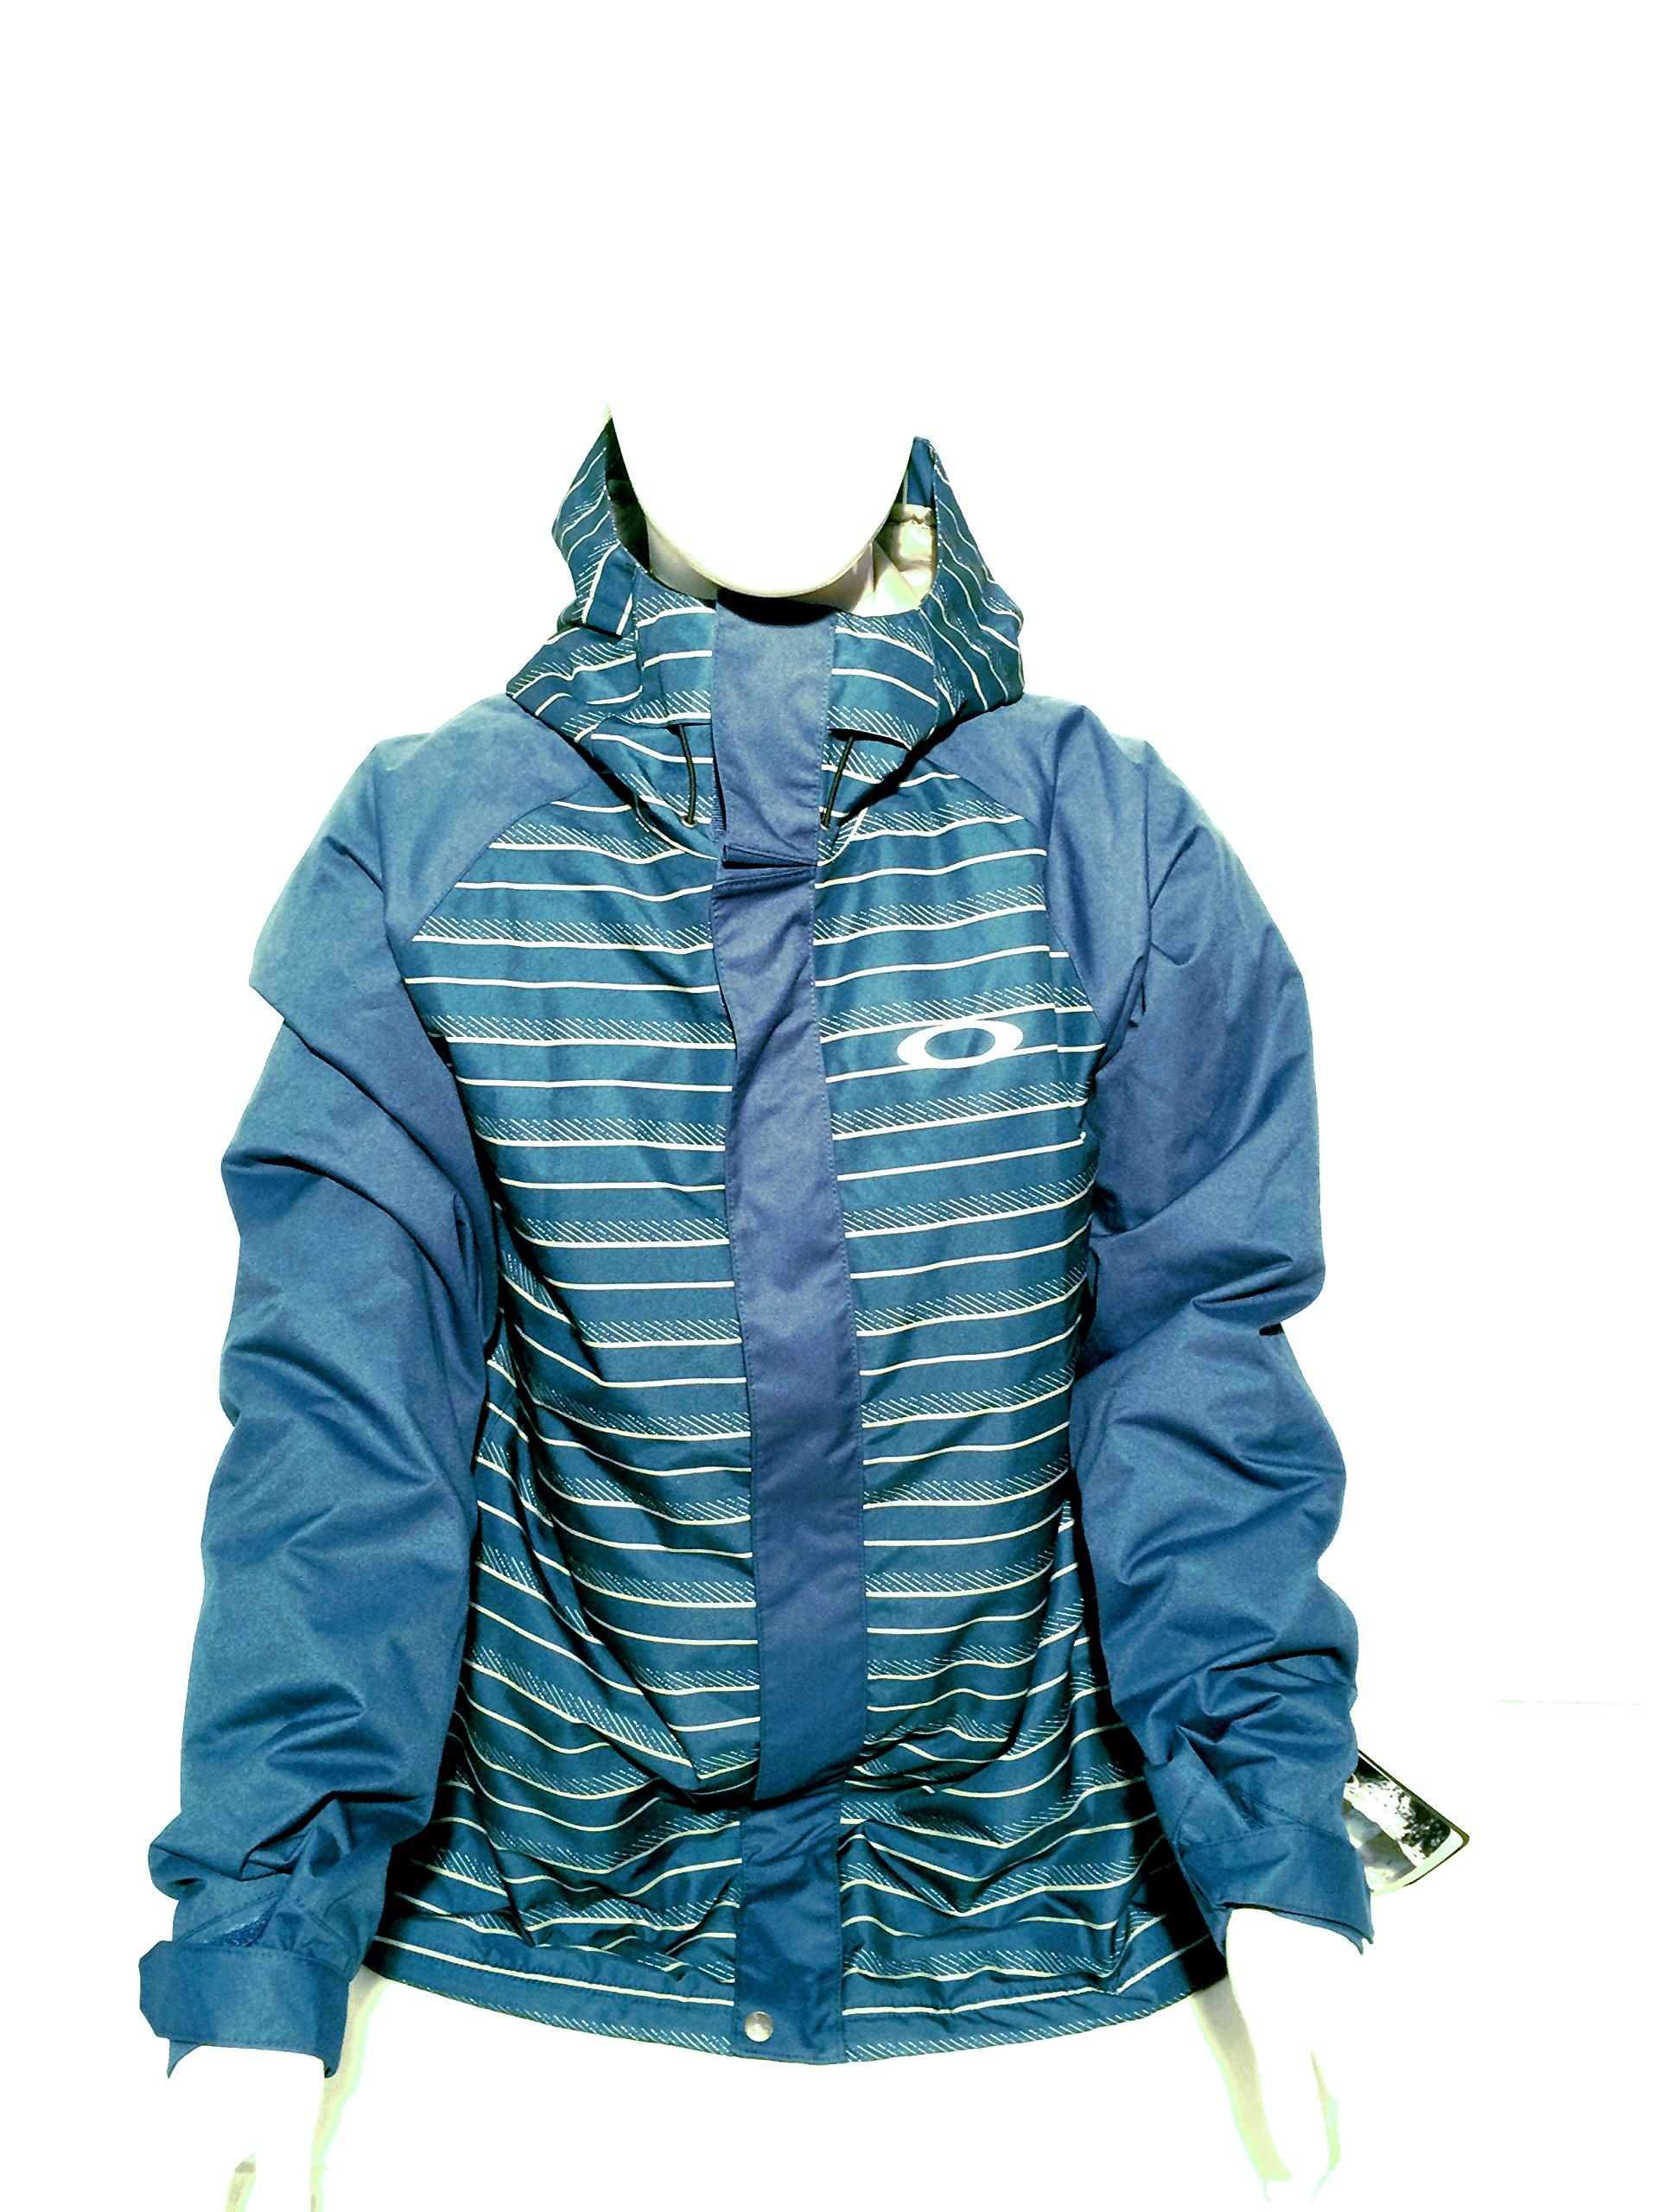 Oakley Mens Switch Olley Jacket, Blue Print - image 1 of 1